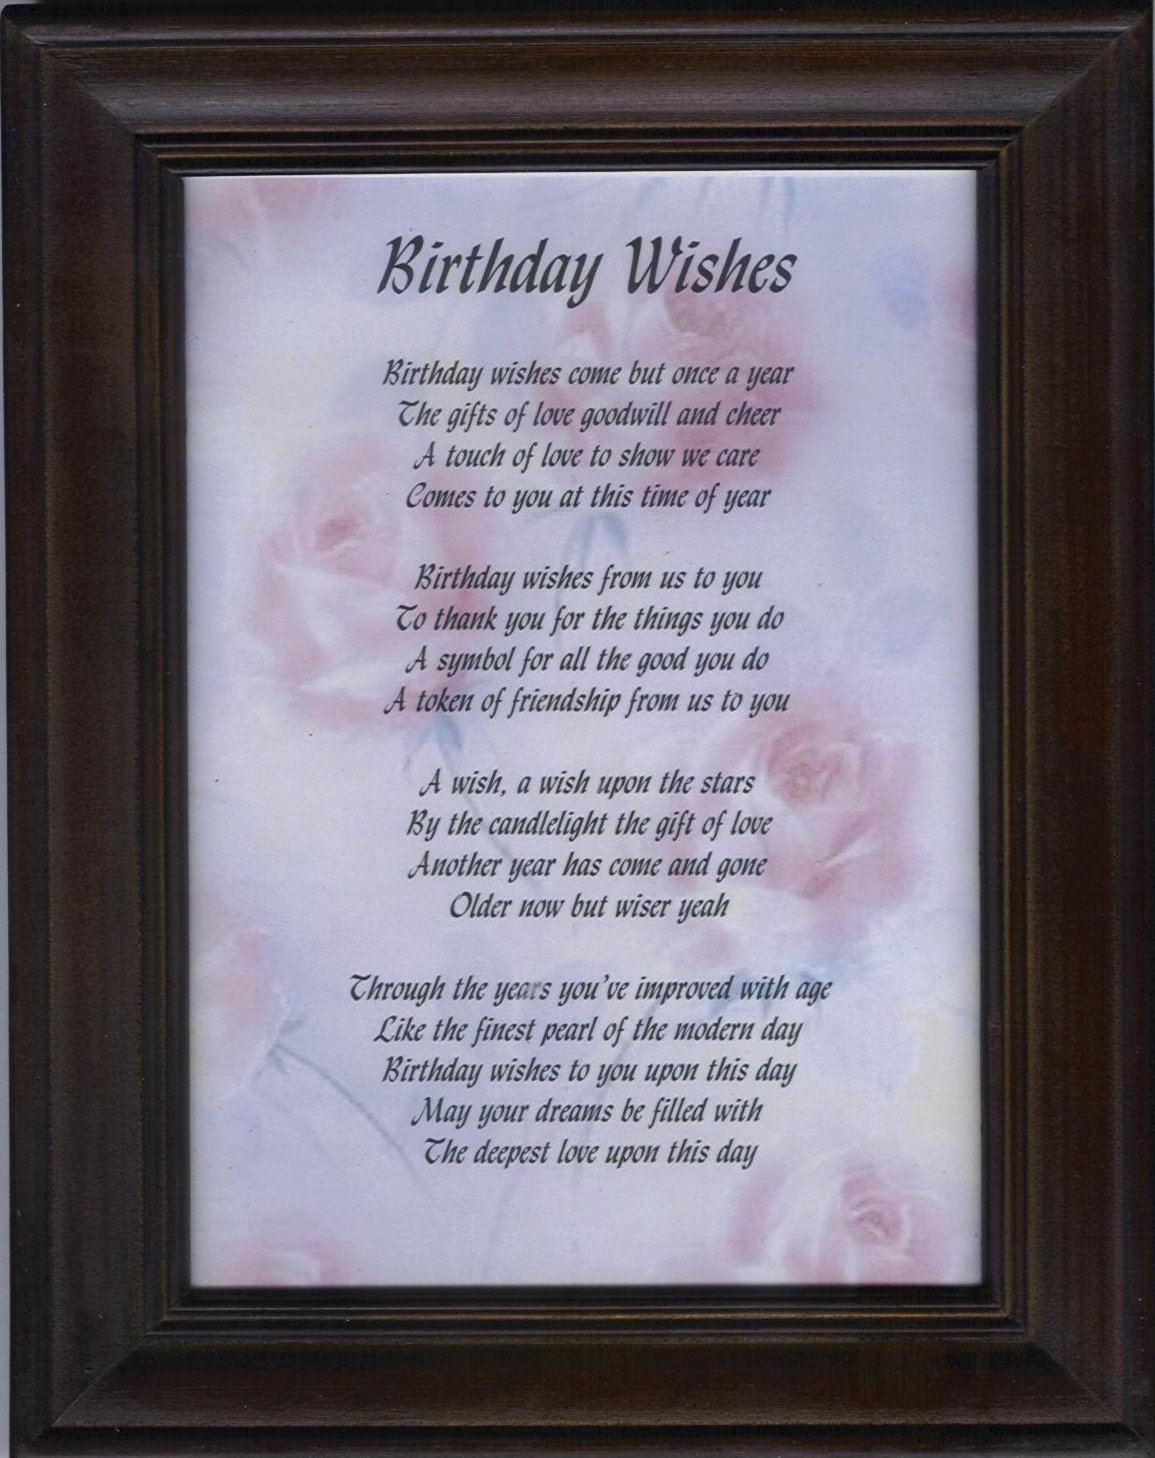 Birthday Wishes And Quotes
 Unique Birthday Wishes Quotes QuotesGram